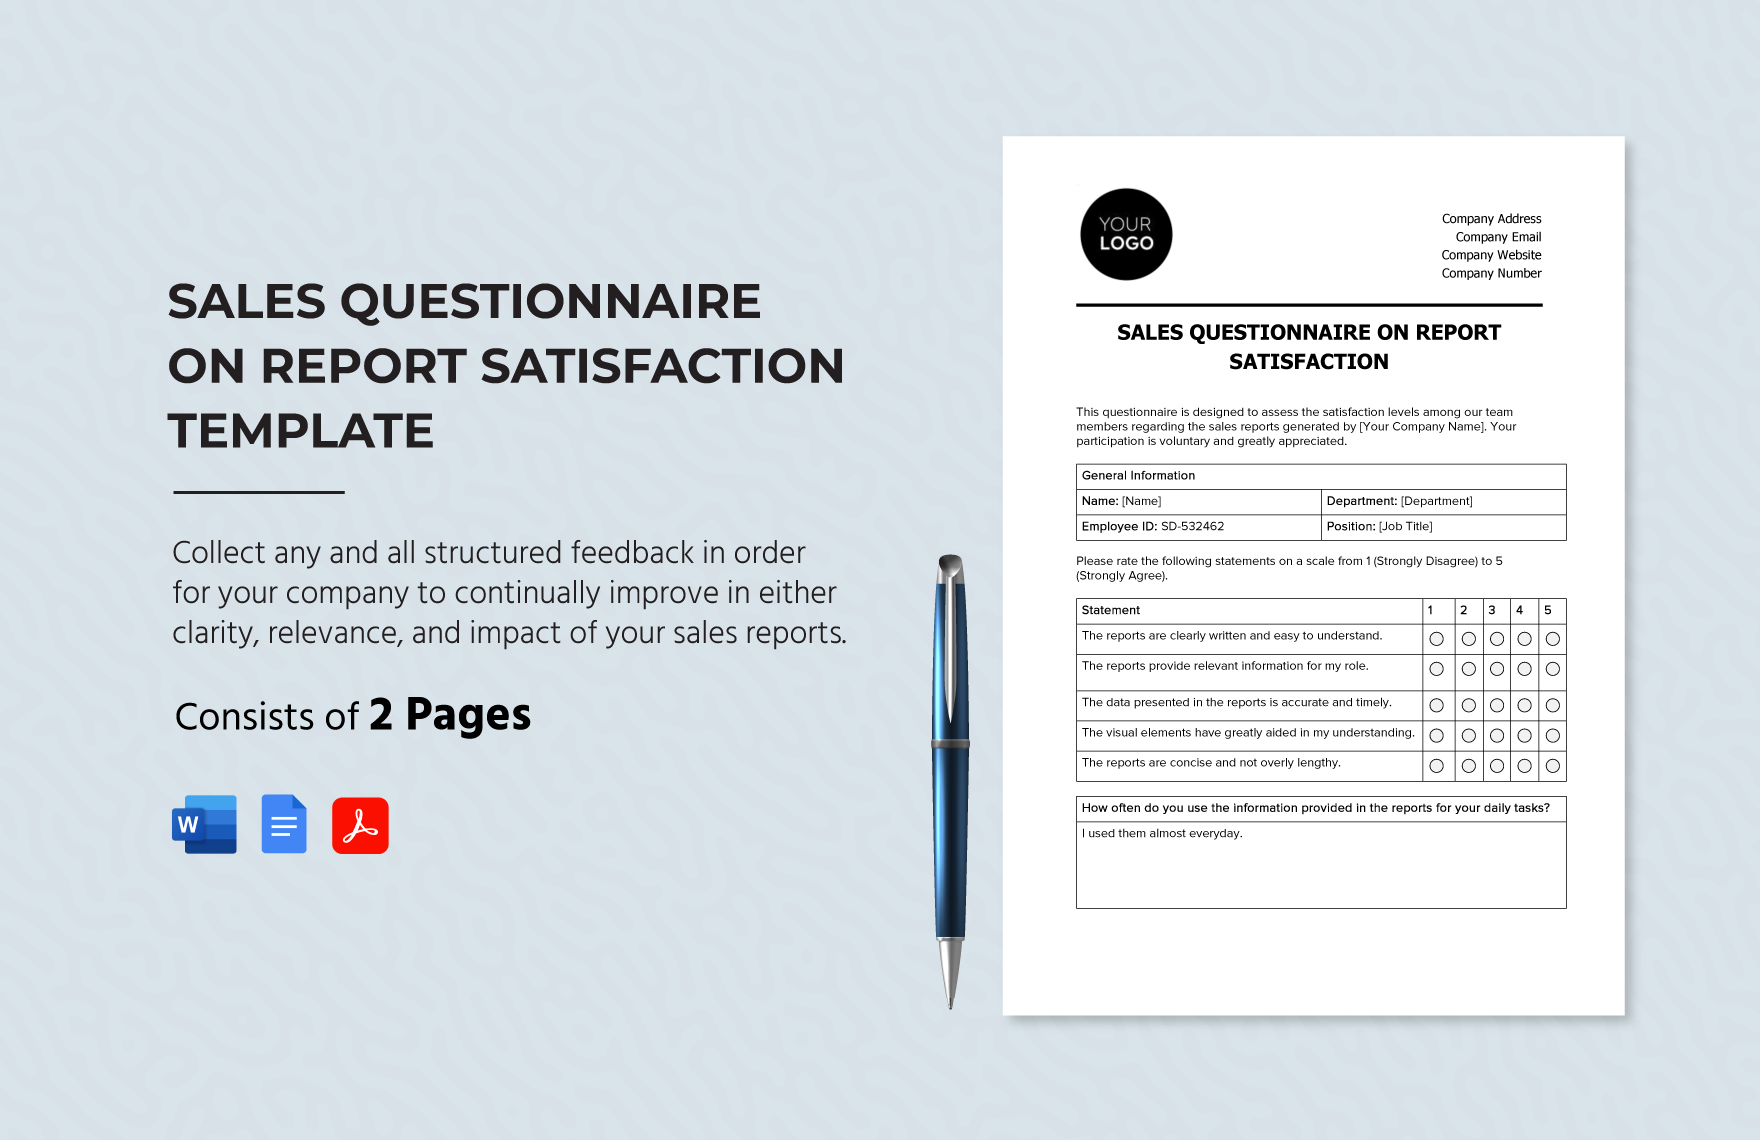 Sales Questionnaire on Report Satisfaction Template in Word, Google Docs, PDF